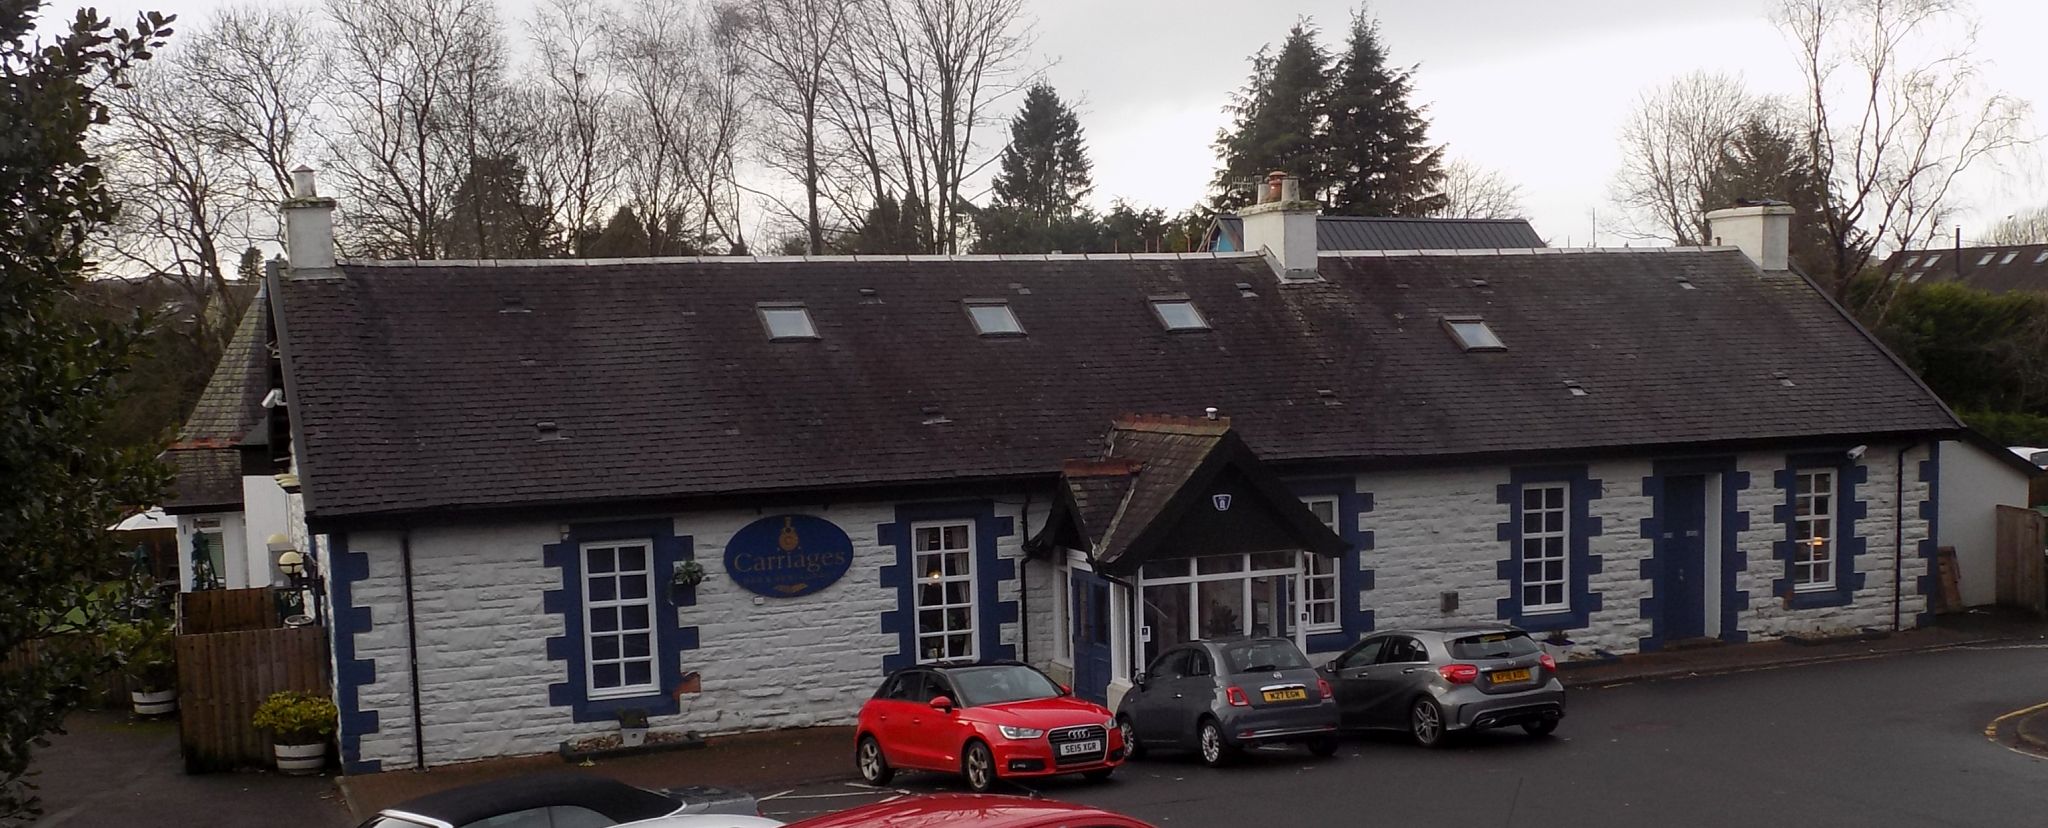 Carriages Pub in Kilmacolm